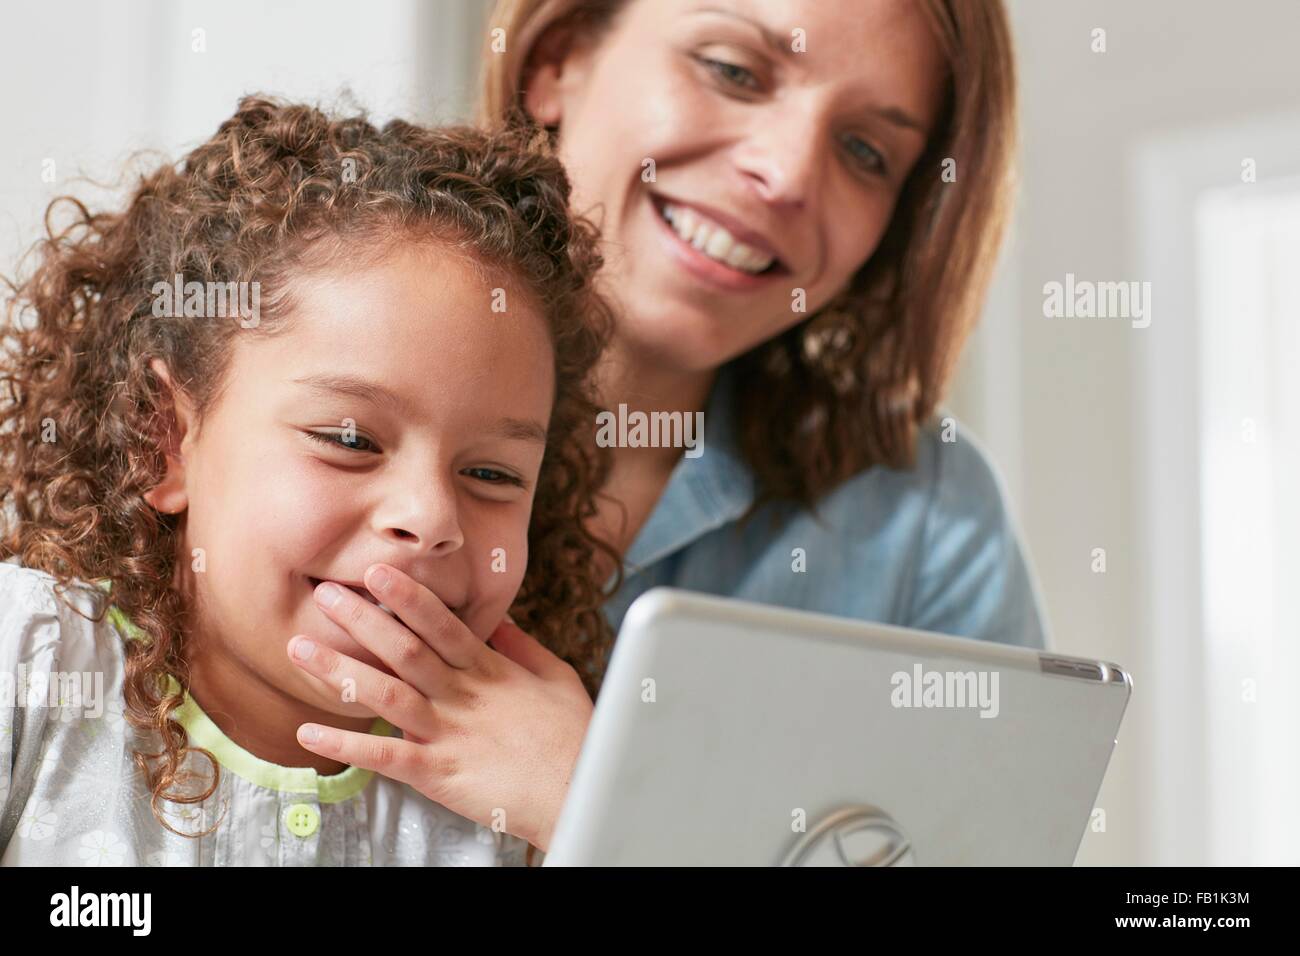 Low angle view of mother and daughter using digital tablet, main sur bouche smiling Banque D'Images